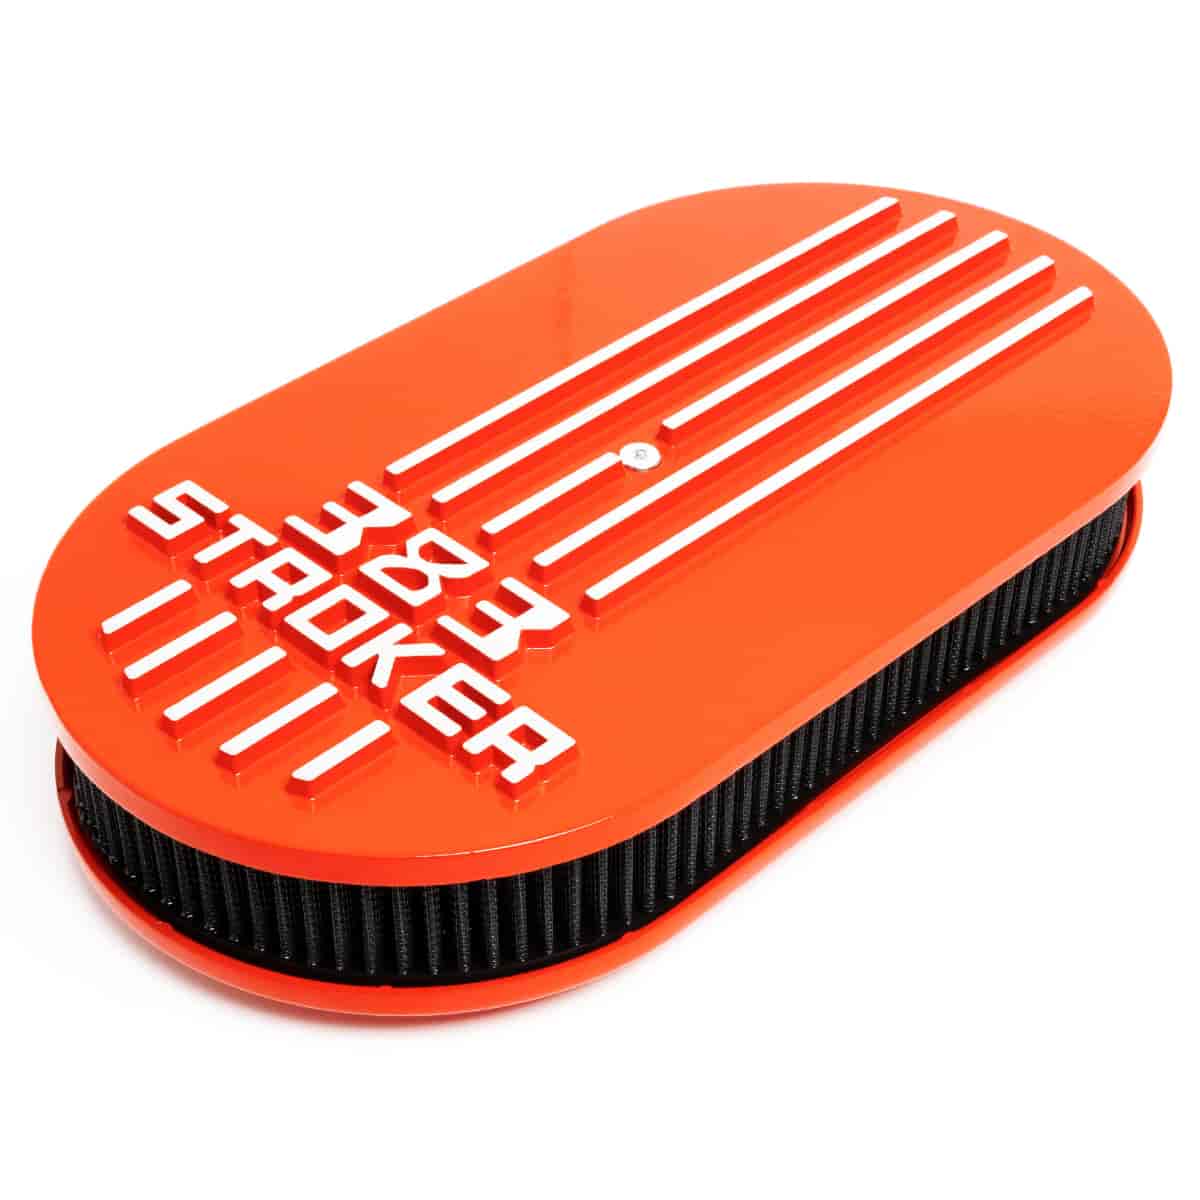 383 Stroker Oval Air Cleaner Assembly [Orange Finish